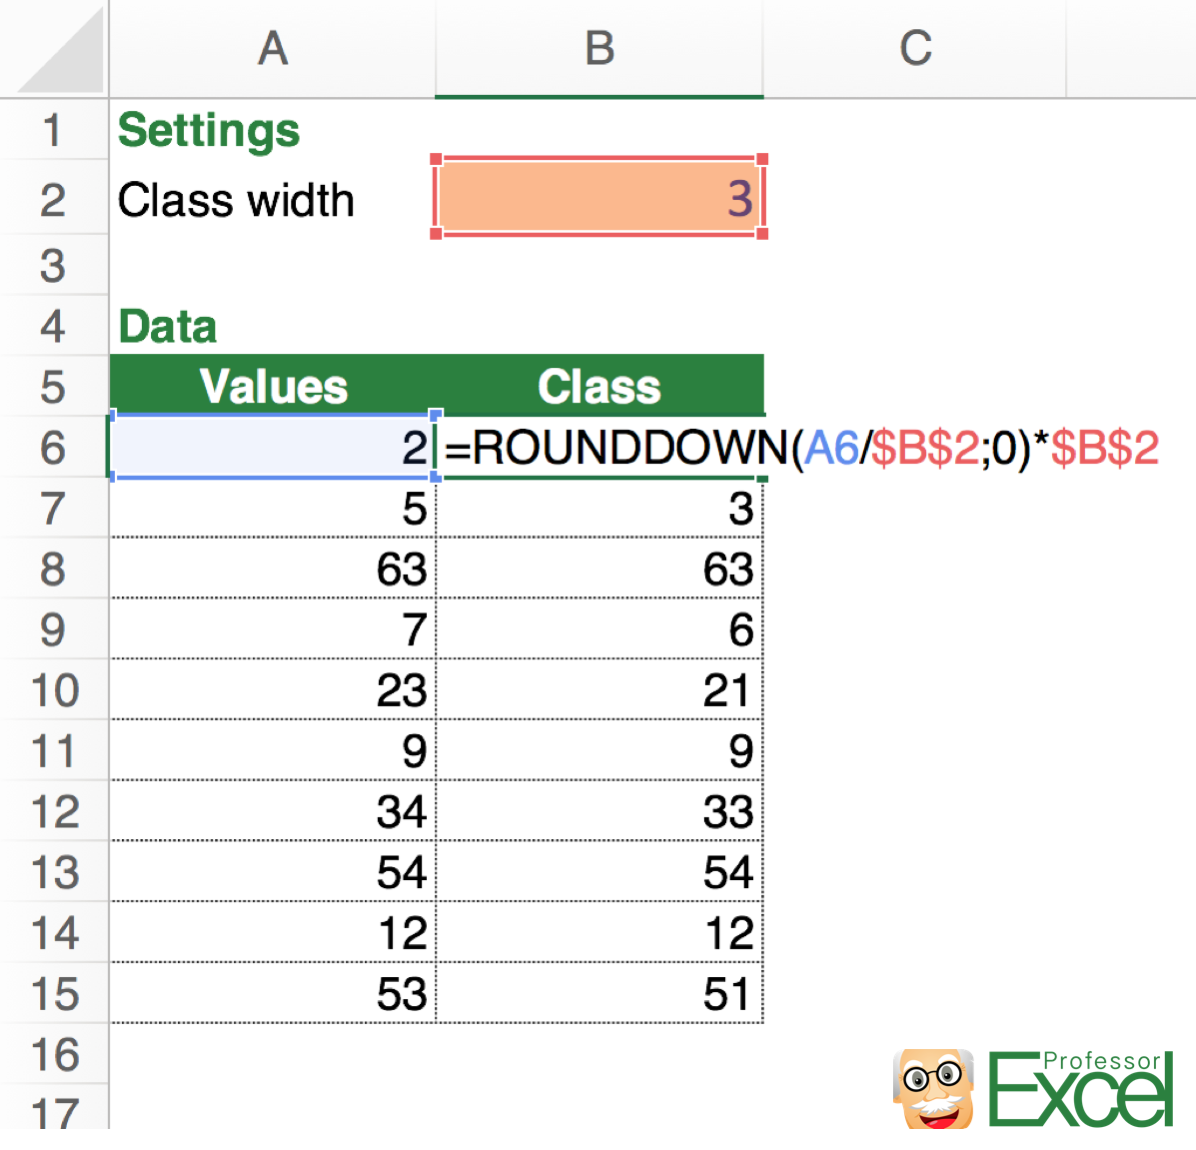 classes, classifiy, class, round, rounddown, excel